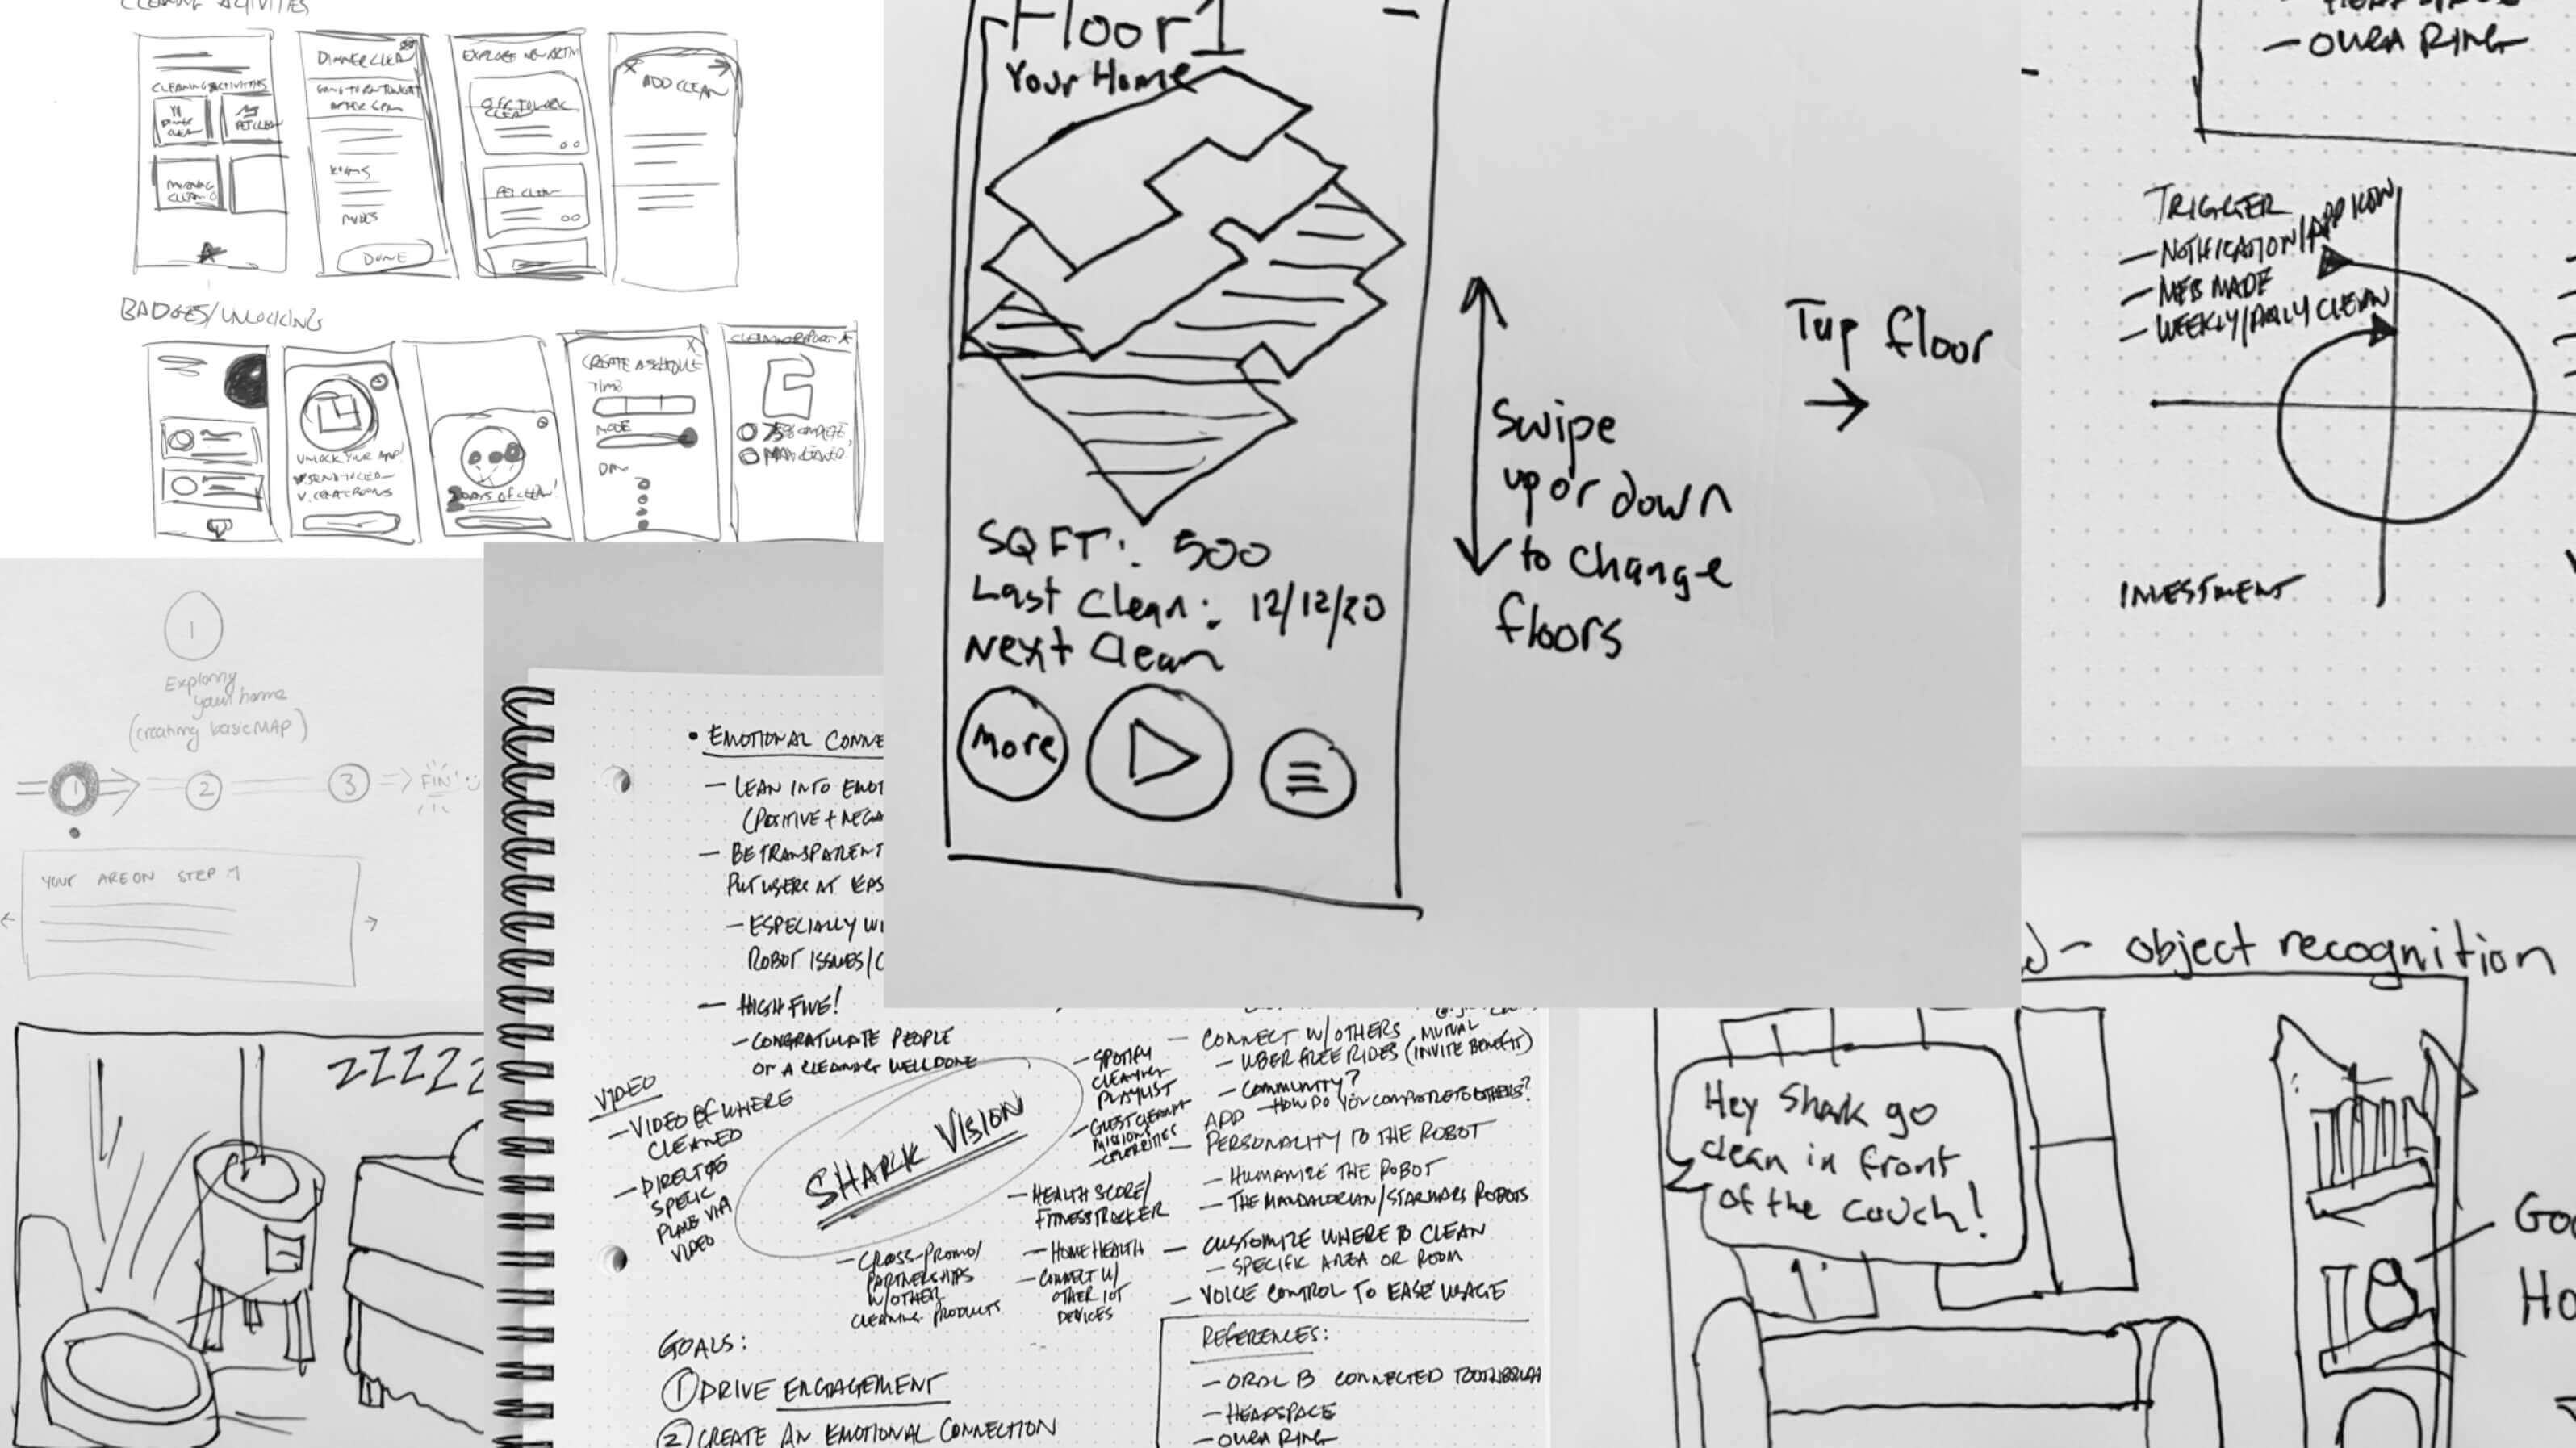 Collage of sketches and low fidelity wireframes describing 3D mapping and strategic cleaning concepts